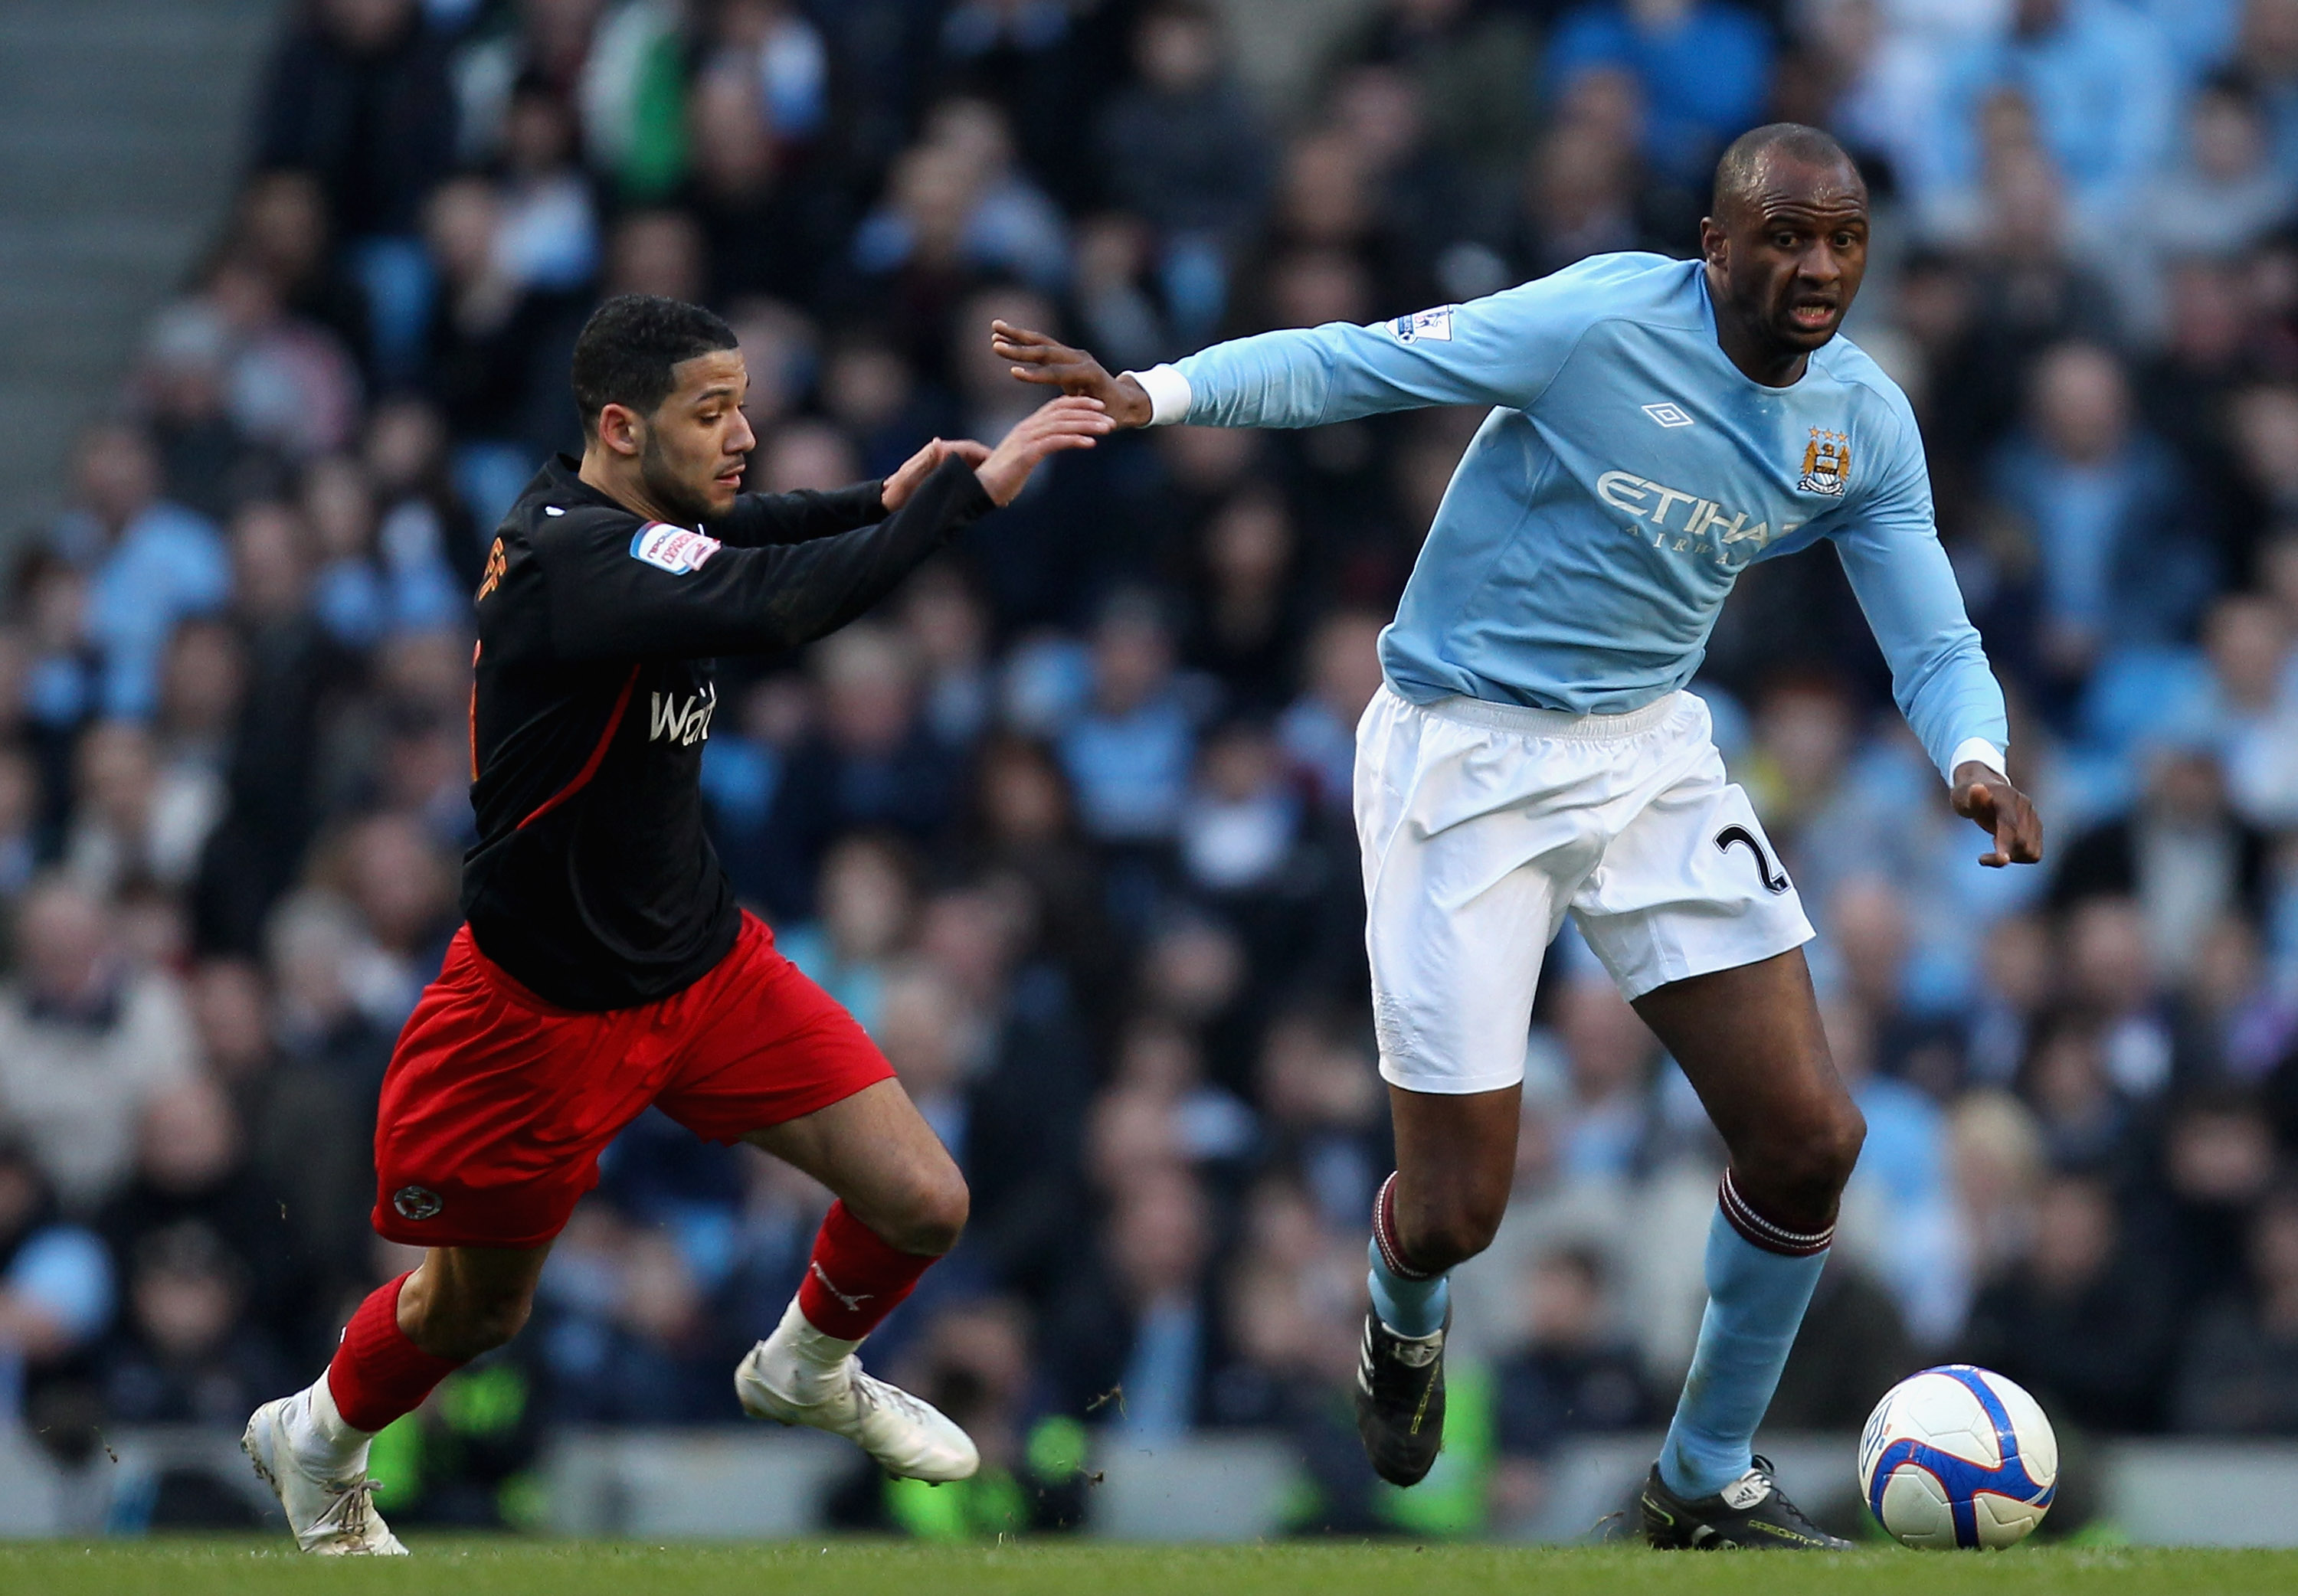 MANCHESTER, ENGLAND - MARCH 13:  Patrick Vieira of Manchester City holds off the challenge by Jobi McAnuff of Reading during the FA Cup sponsored by E.On Sixth Round match between Manchester City and Reading at the City of Manchester Stadium on March 13,